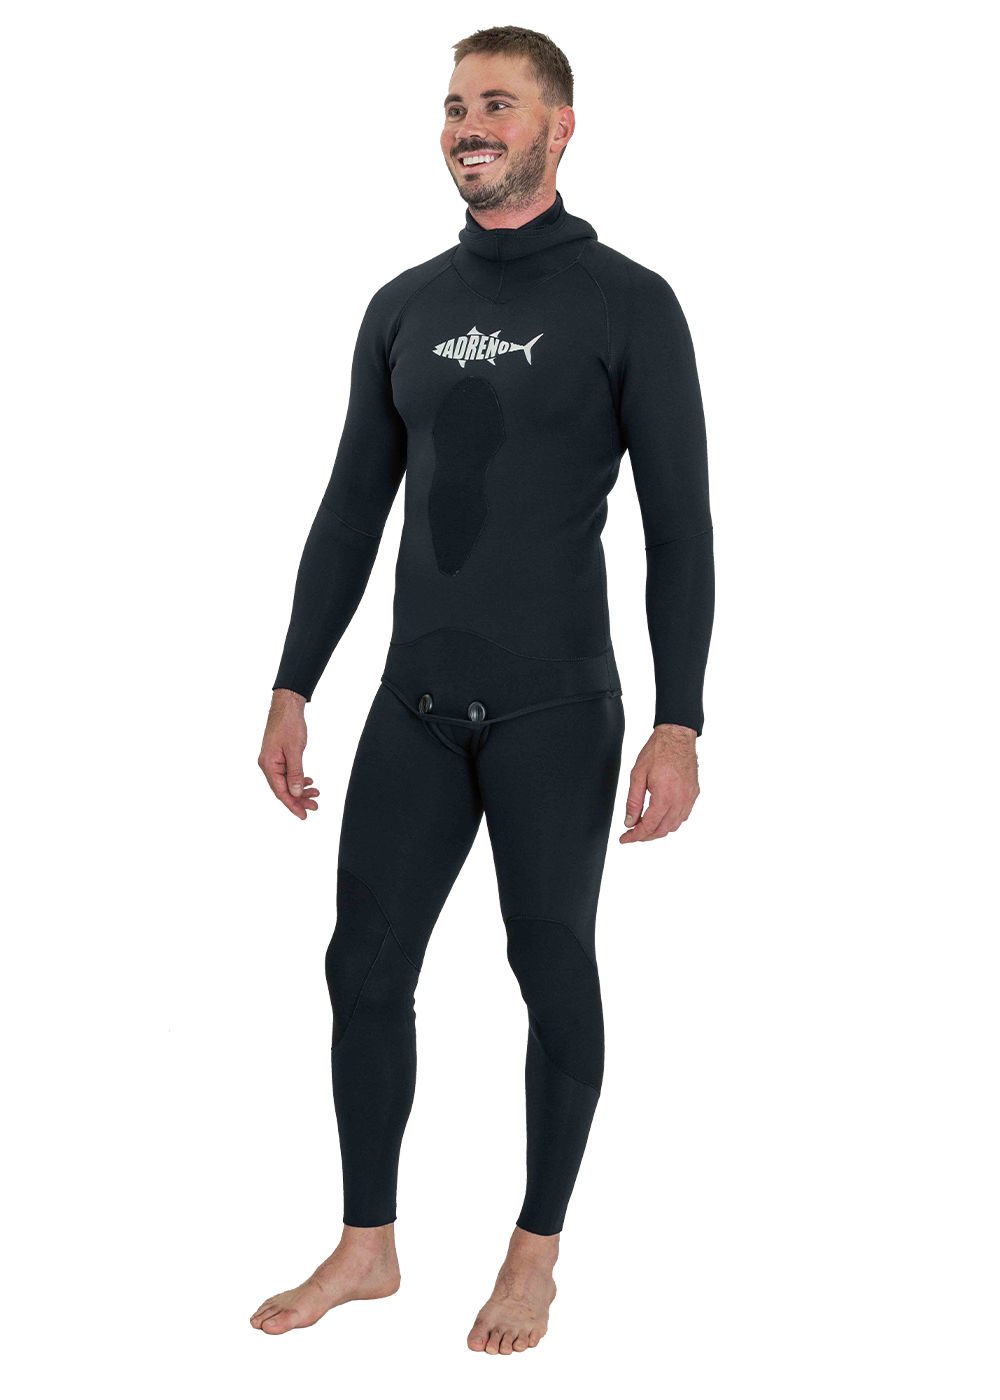 Adreno Tuna 5mm Lined 2 Piece Wetsuit - Adreno - Ocean Outfitters